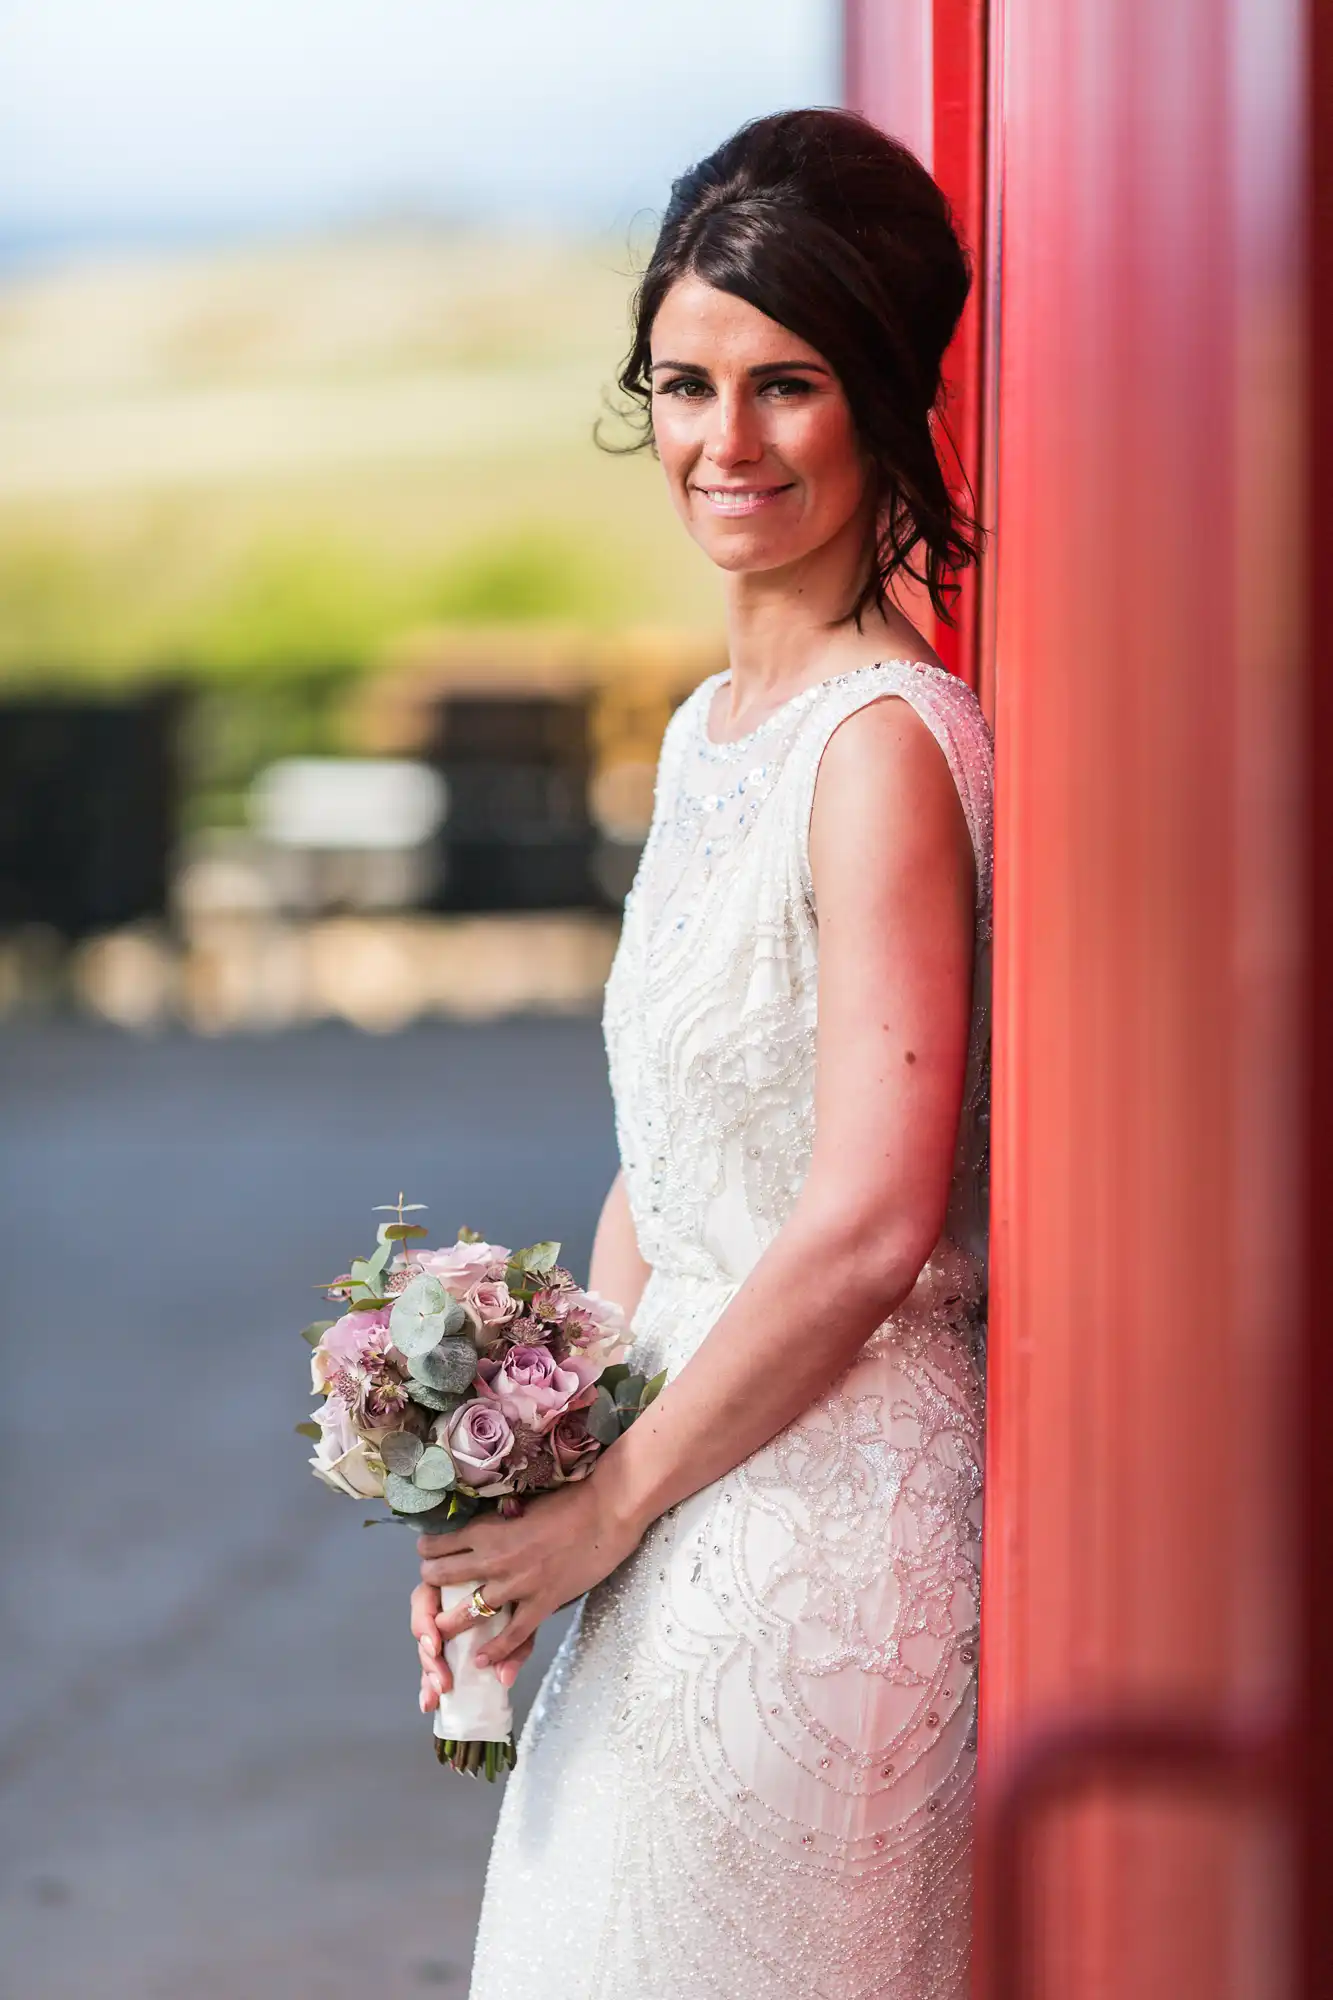 A bride in an elegant white dress, holding a bouquet, smiles subtly next to a vibrant red structure.